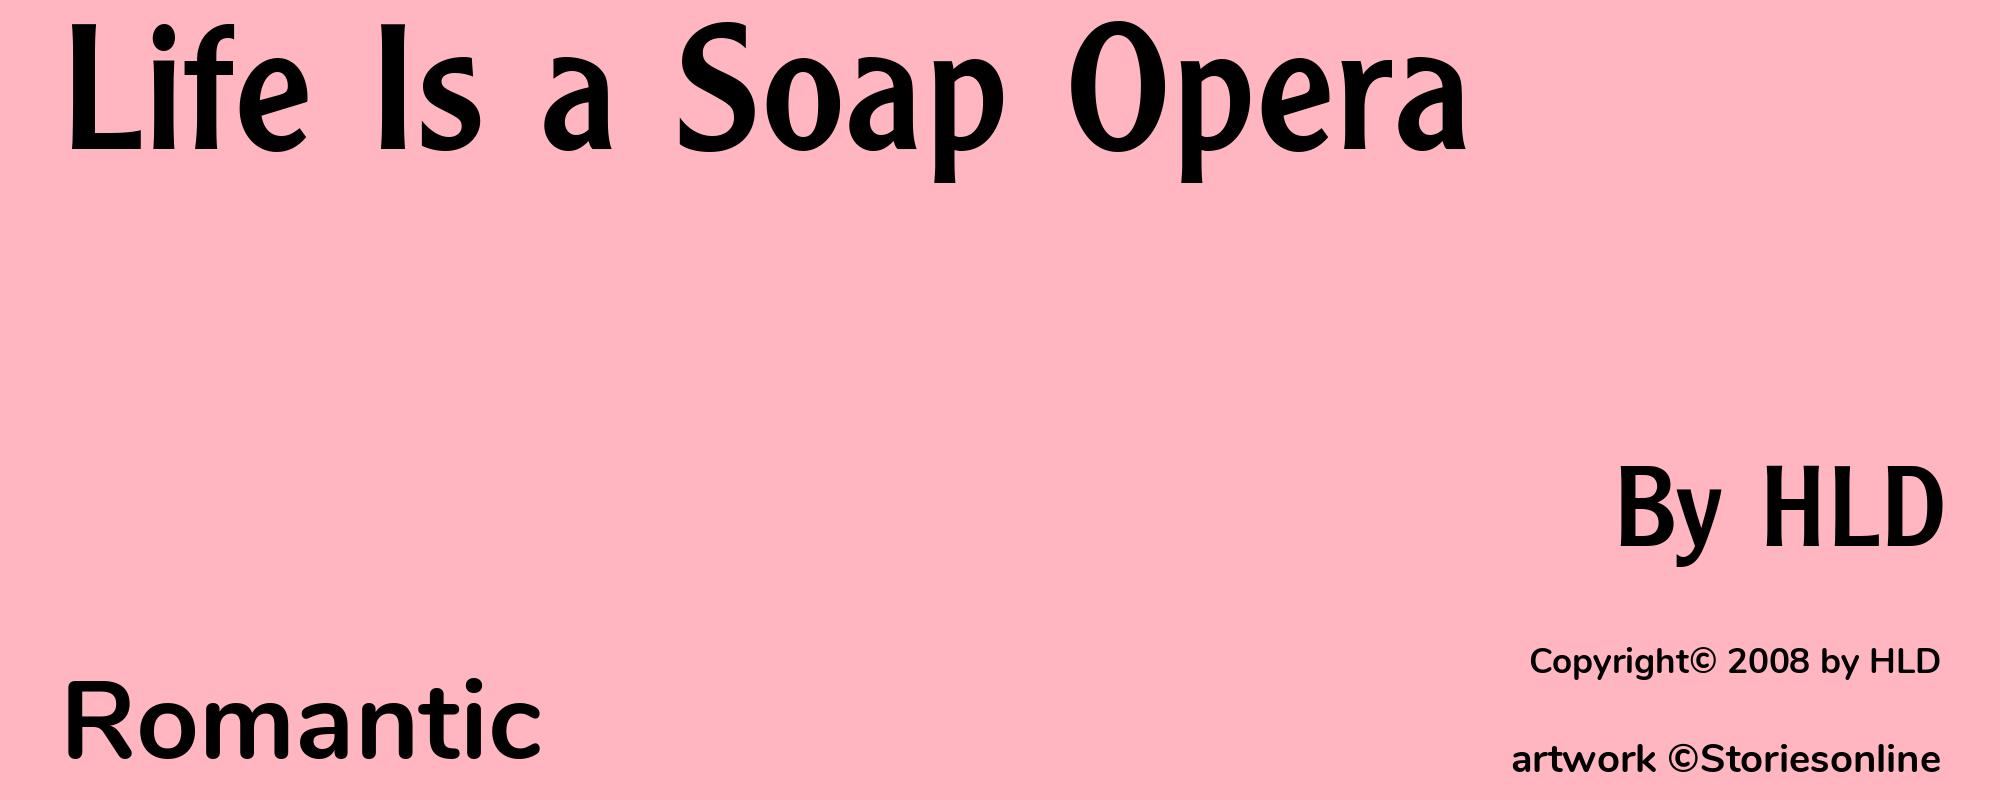 Life Is a Soap Opera - Cover